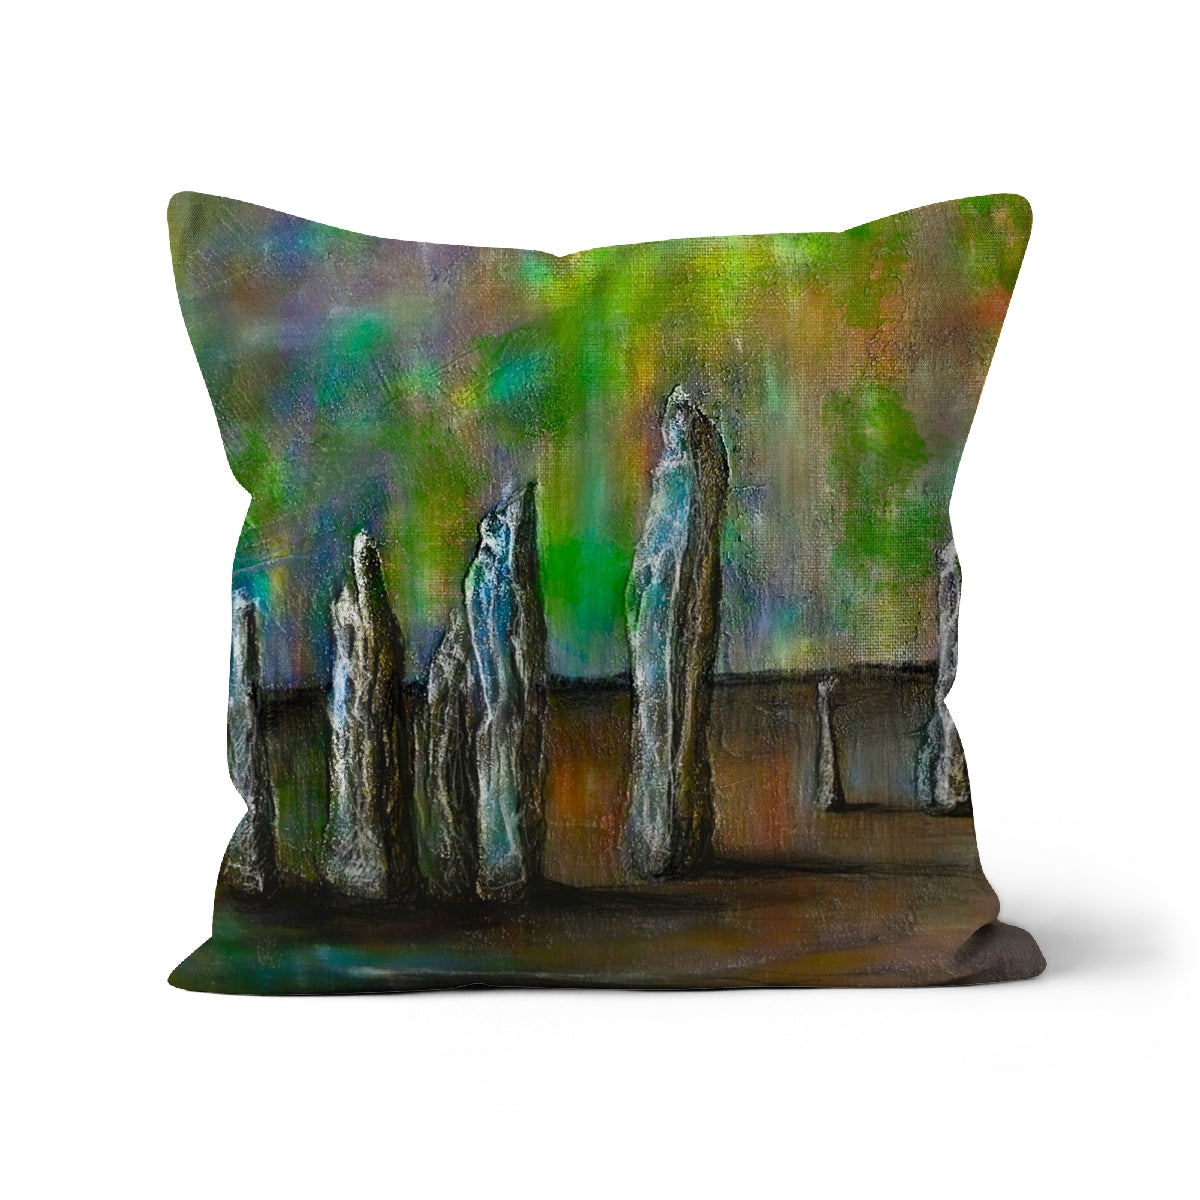 Callanish Northern Lights Art Gifts Cushion-Cushions-Hebridean Islands Art Gallery-Faux Suede-18"x18"-Paintings, Prints, Homeware, Art Gifts From Scotland By Scottish Artist Kevin Hunter